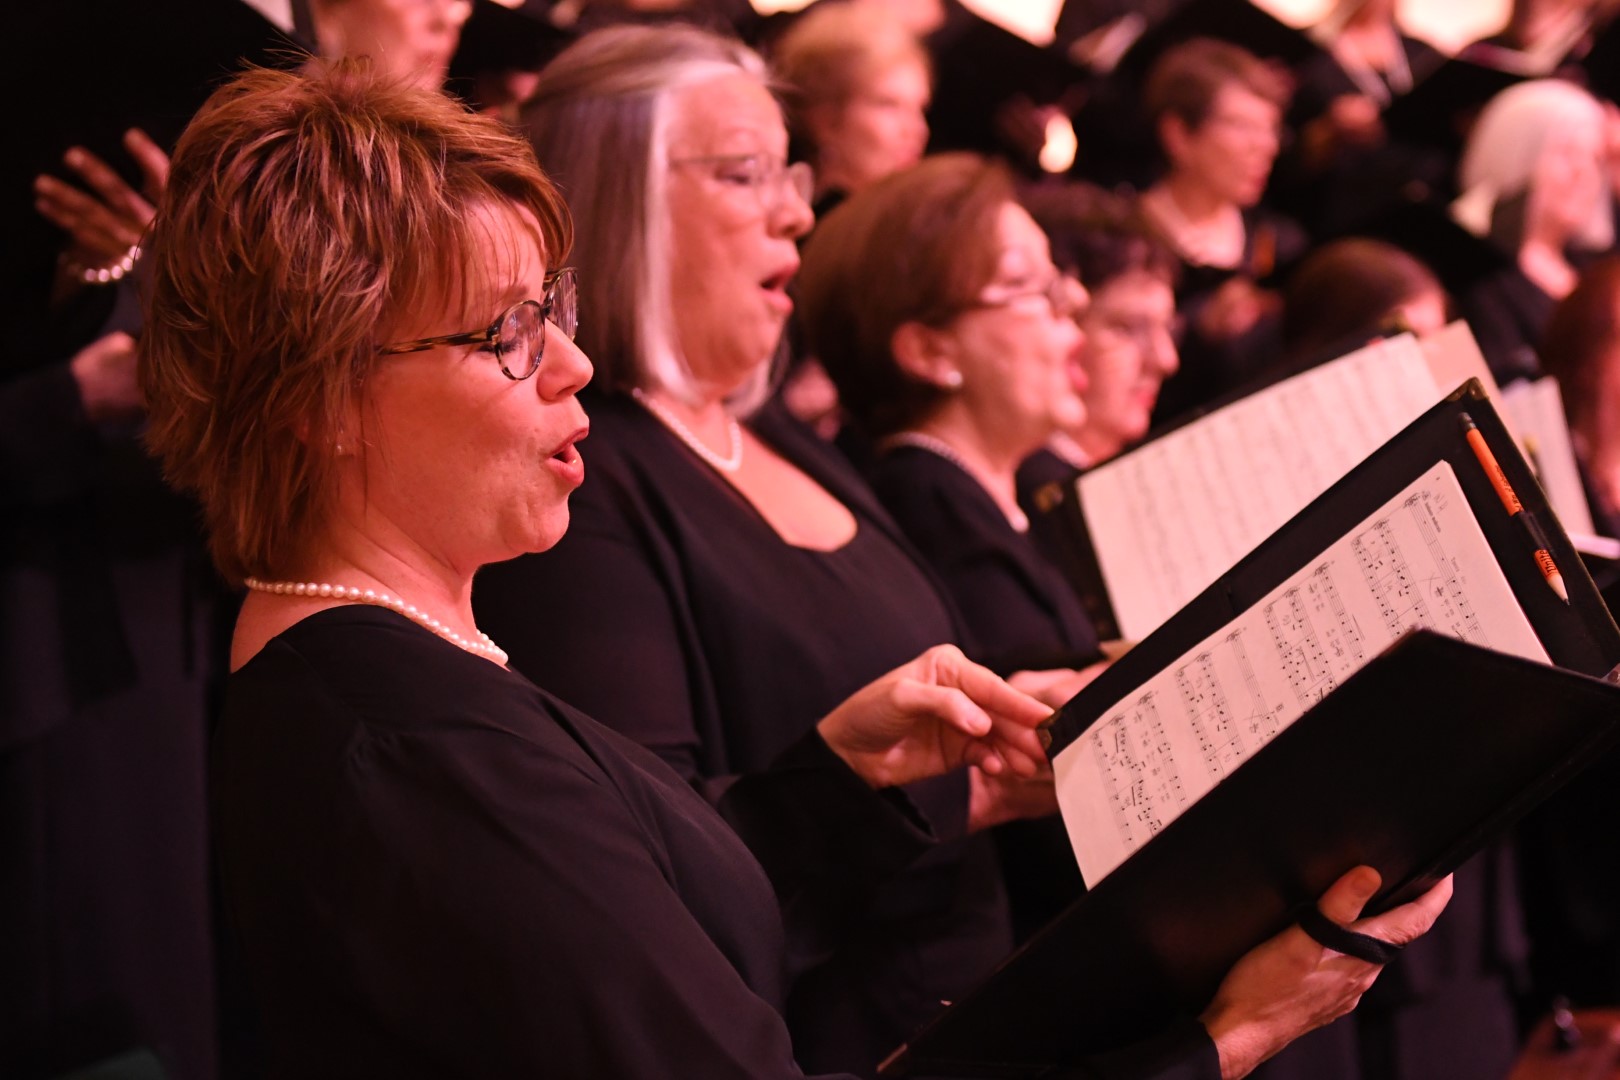 Celebrate The Holidays at Texas Master Chorale’s Christmas Concert on December 16